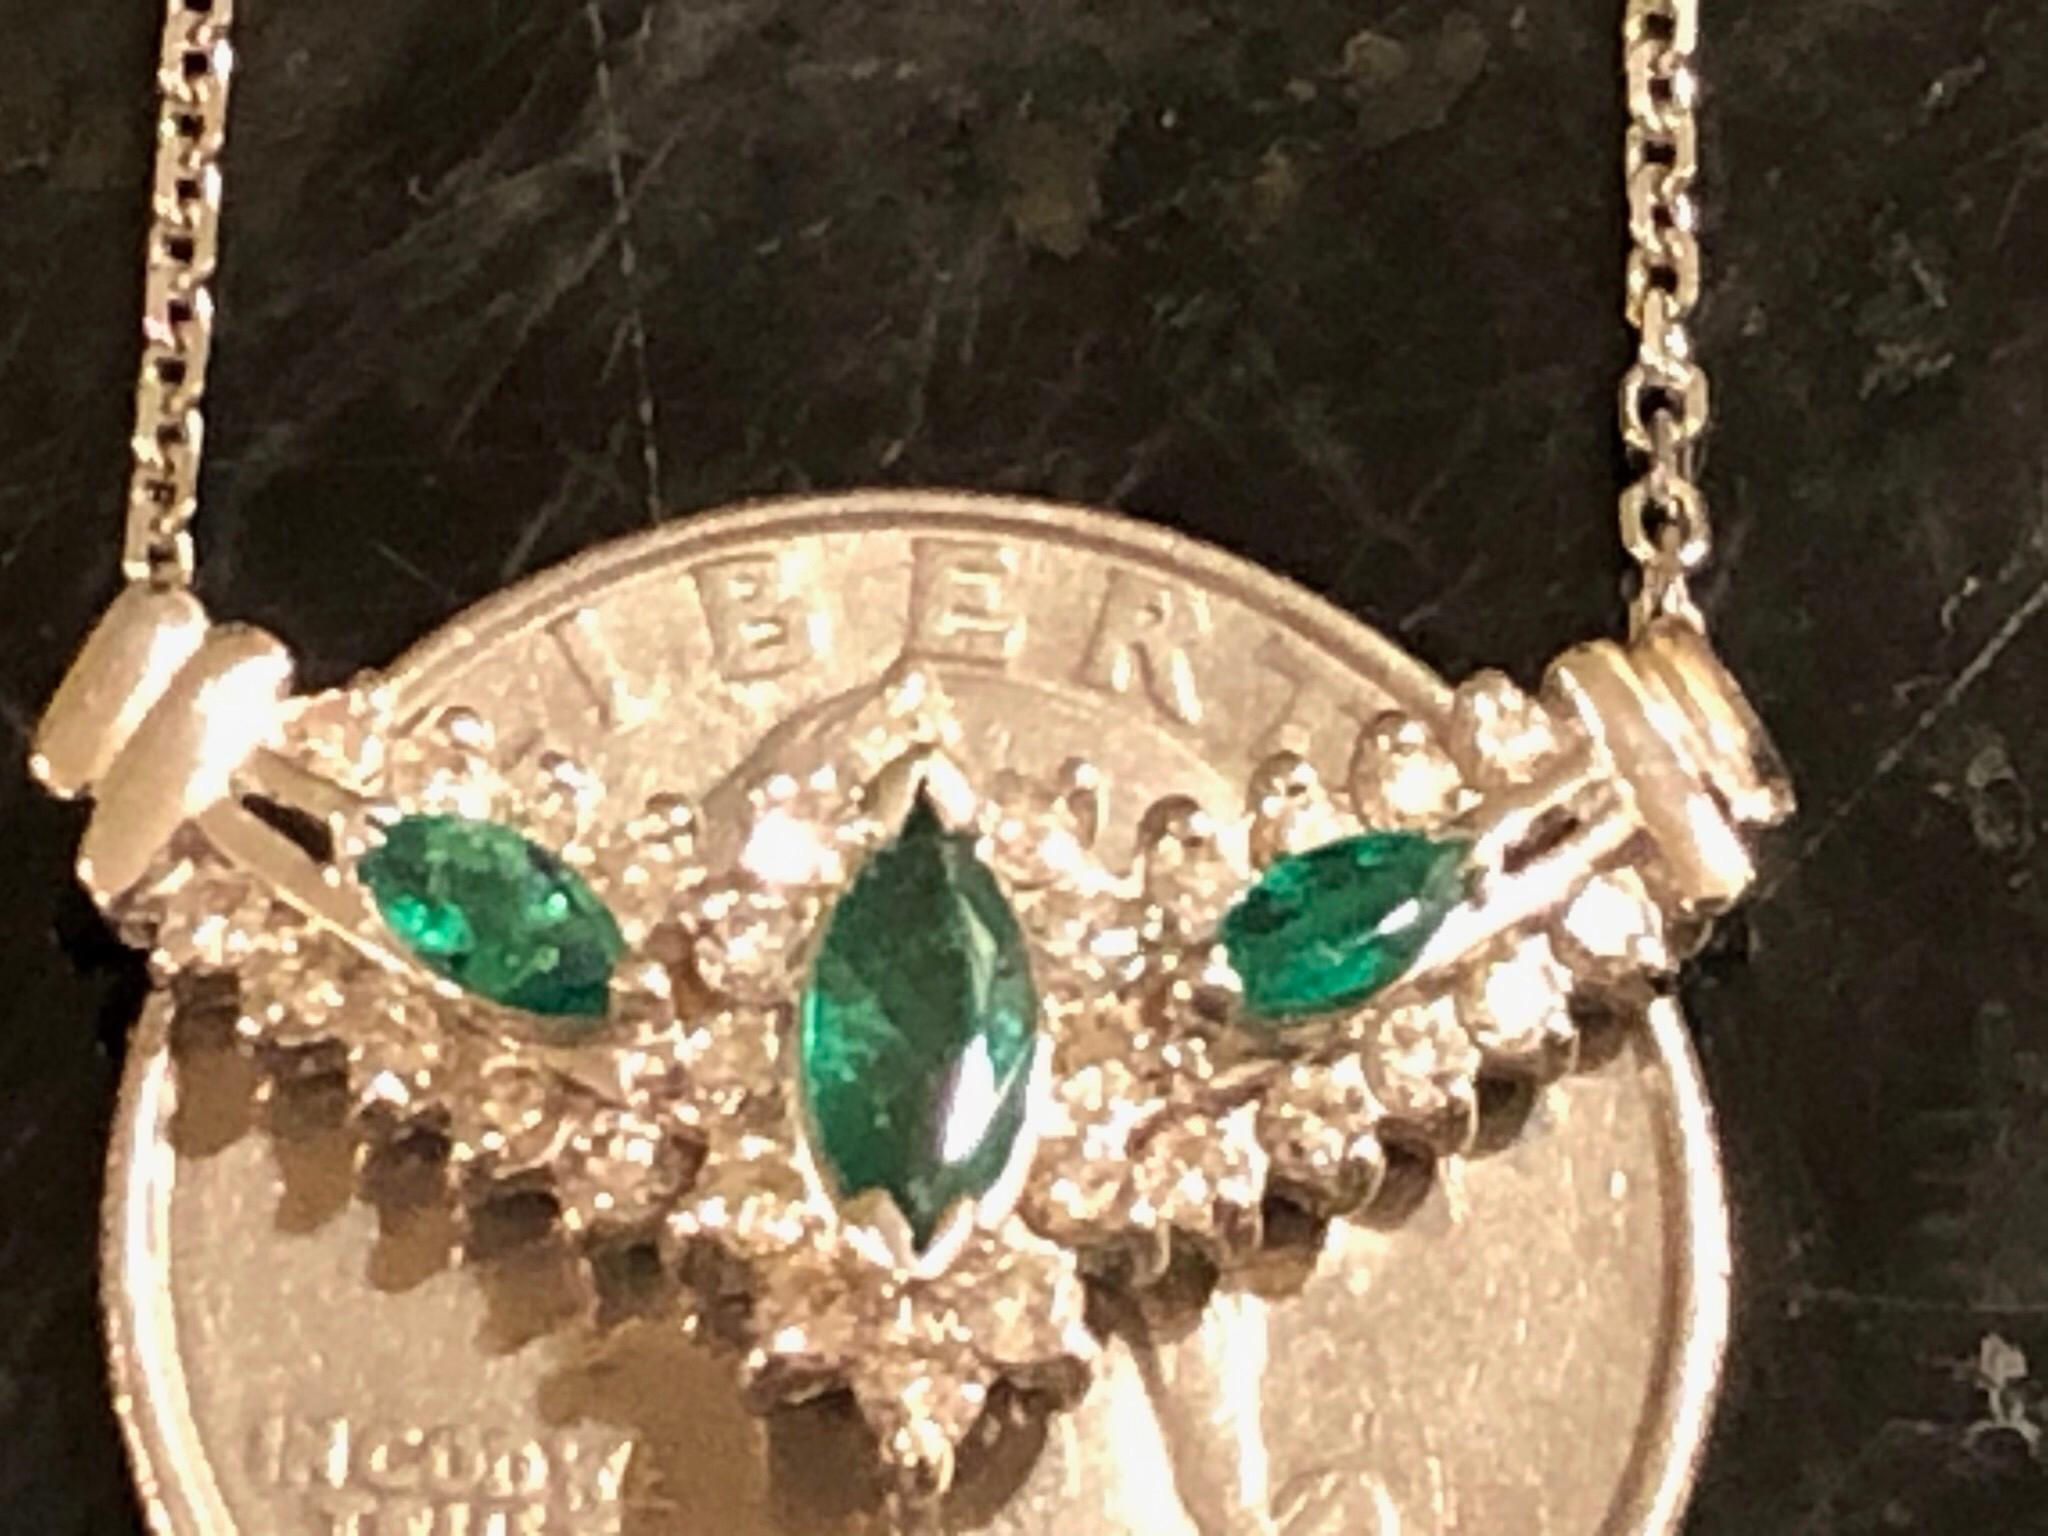 14 Karat White Gold Necklace with Soldered Diamond and Emerald Pendant 6